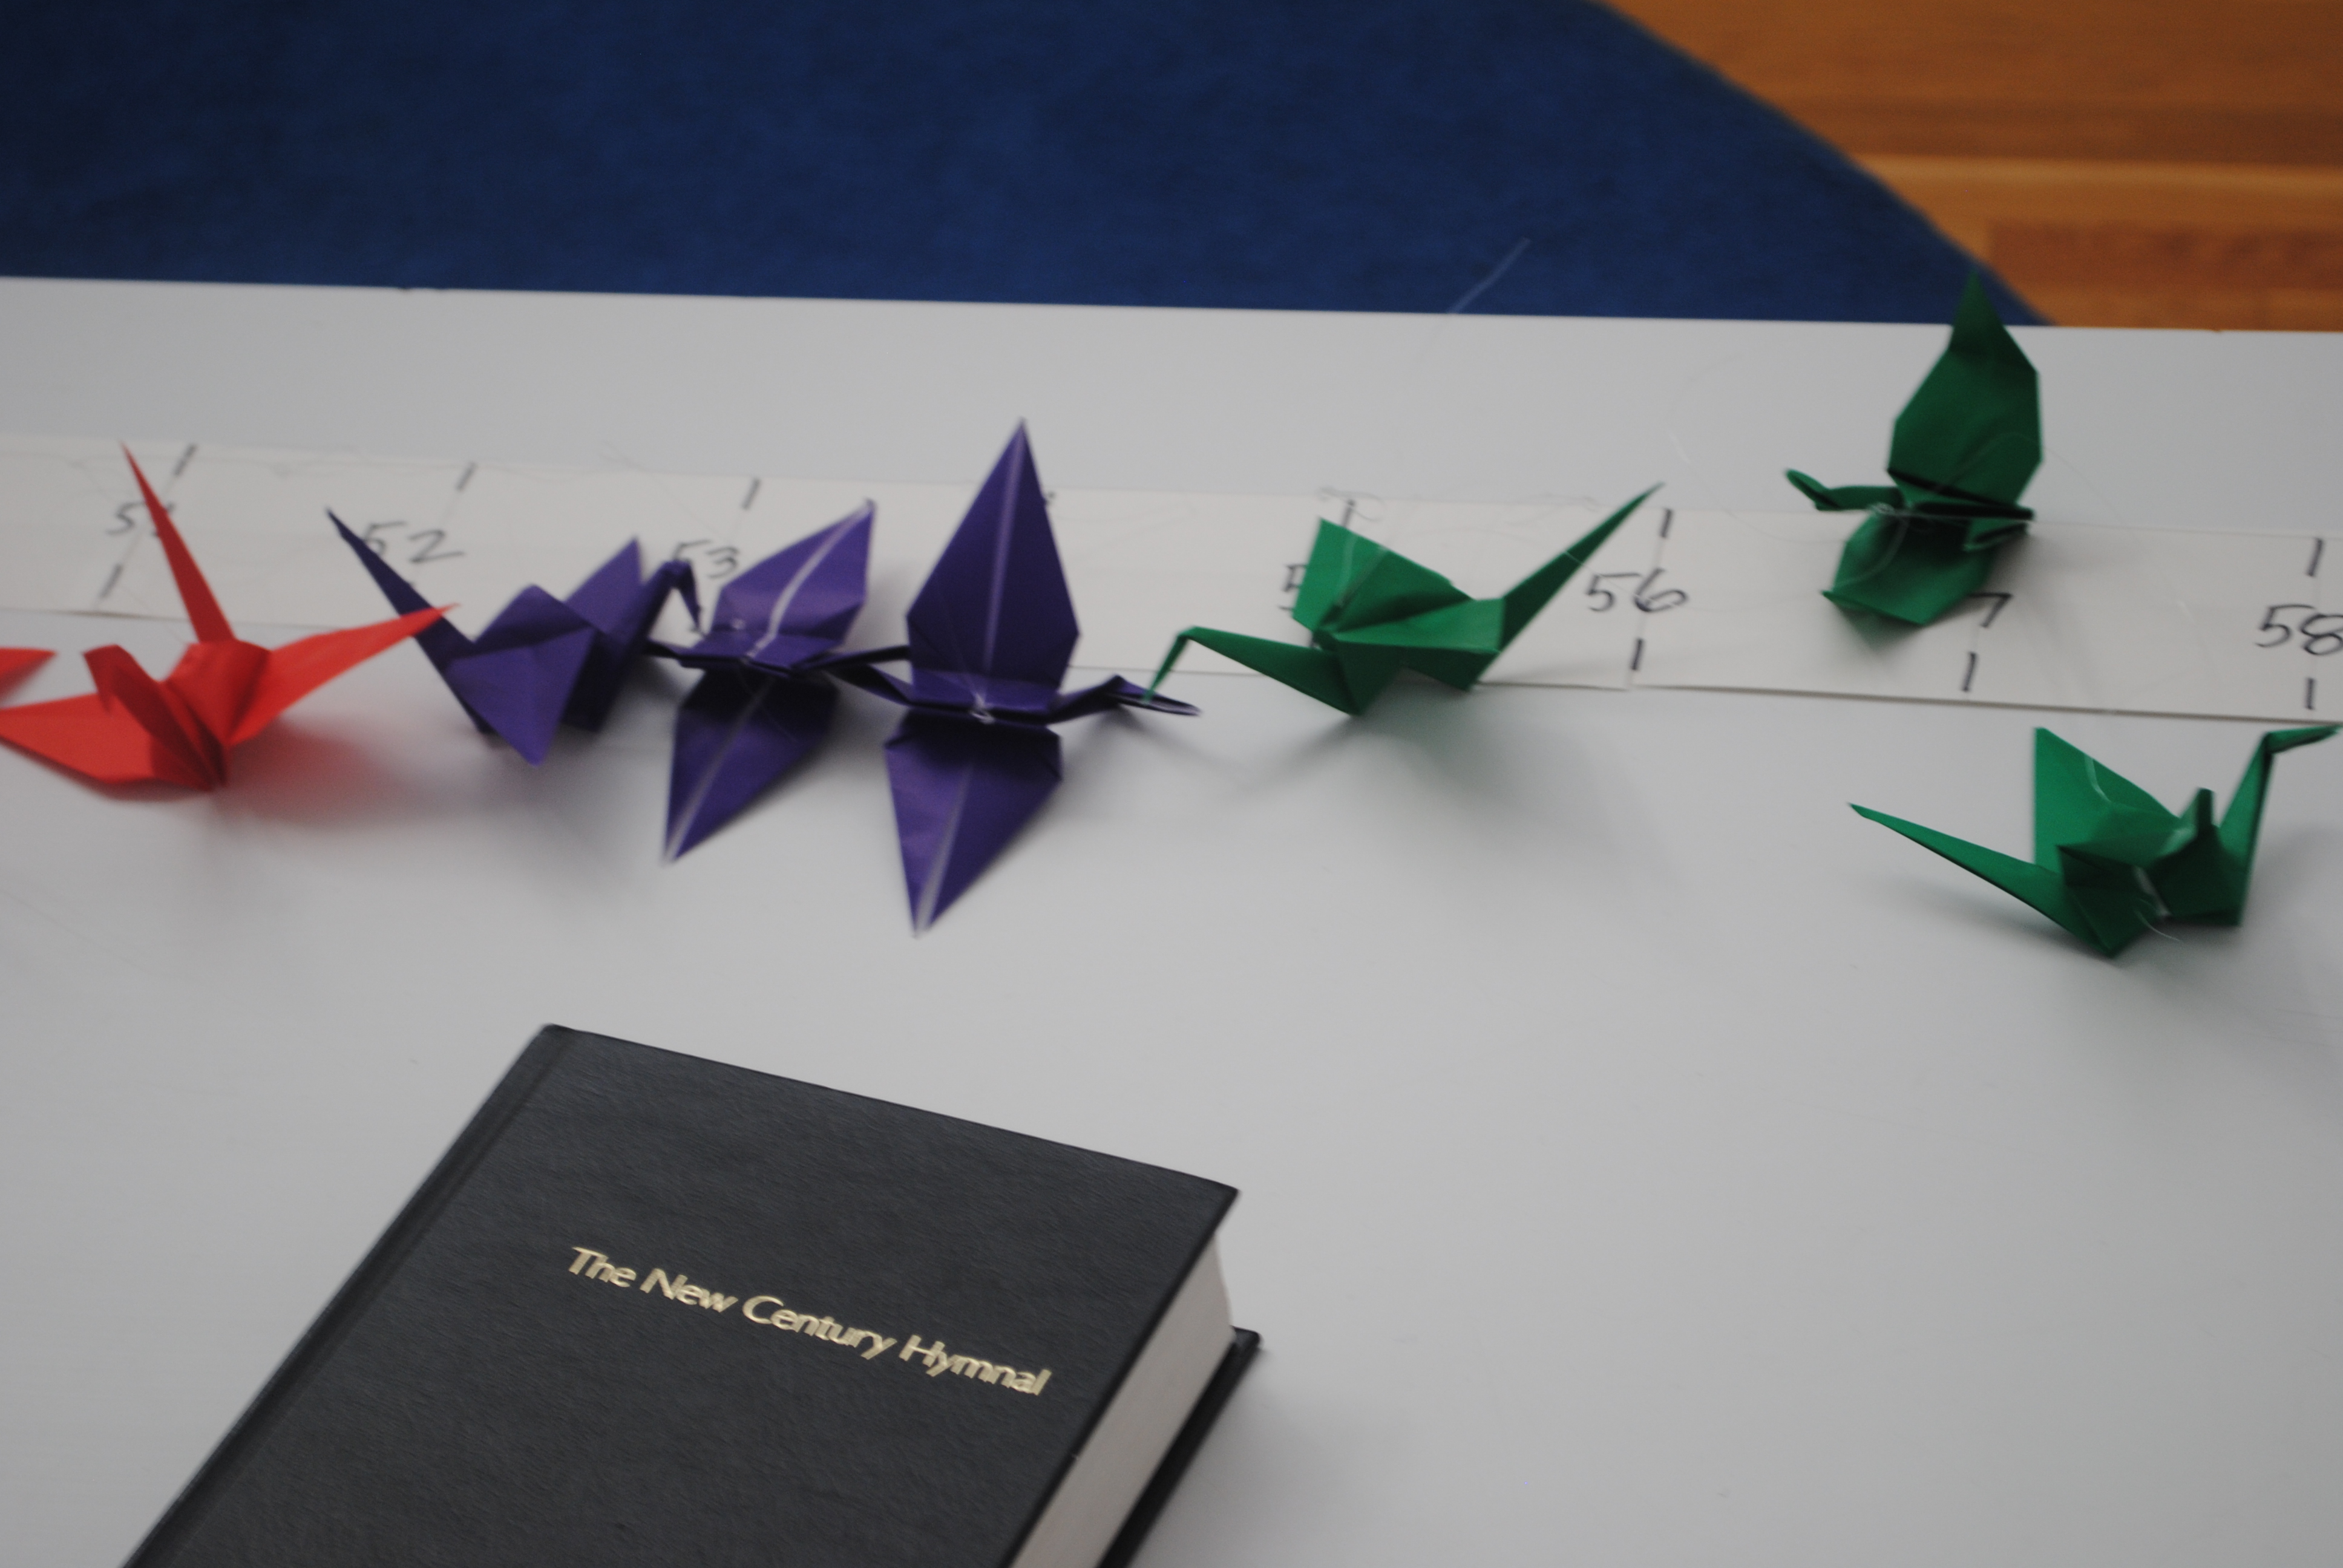 Origami Crane project and dedication